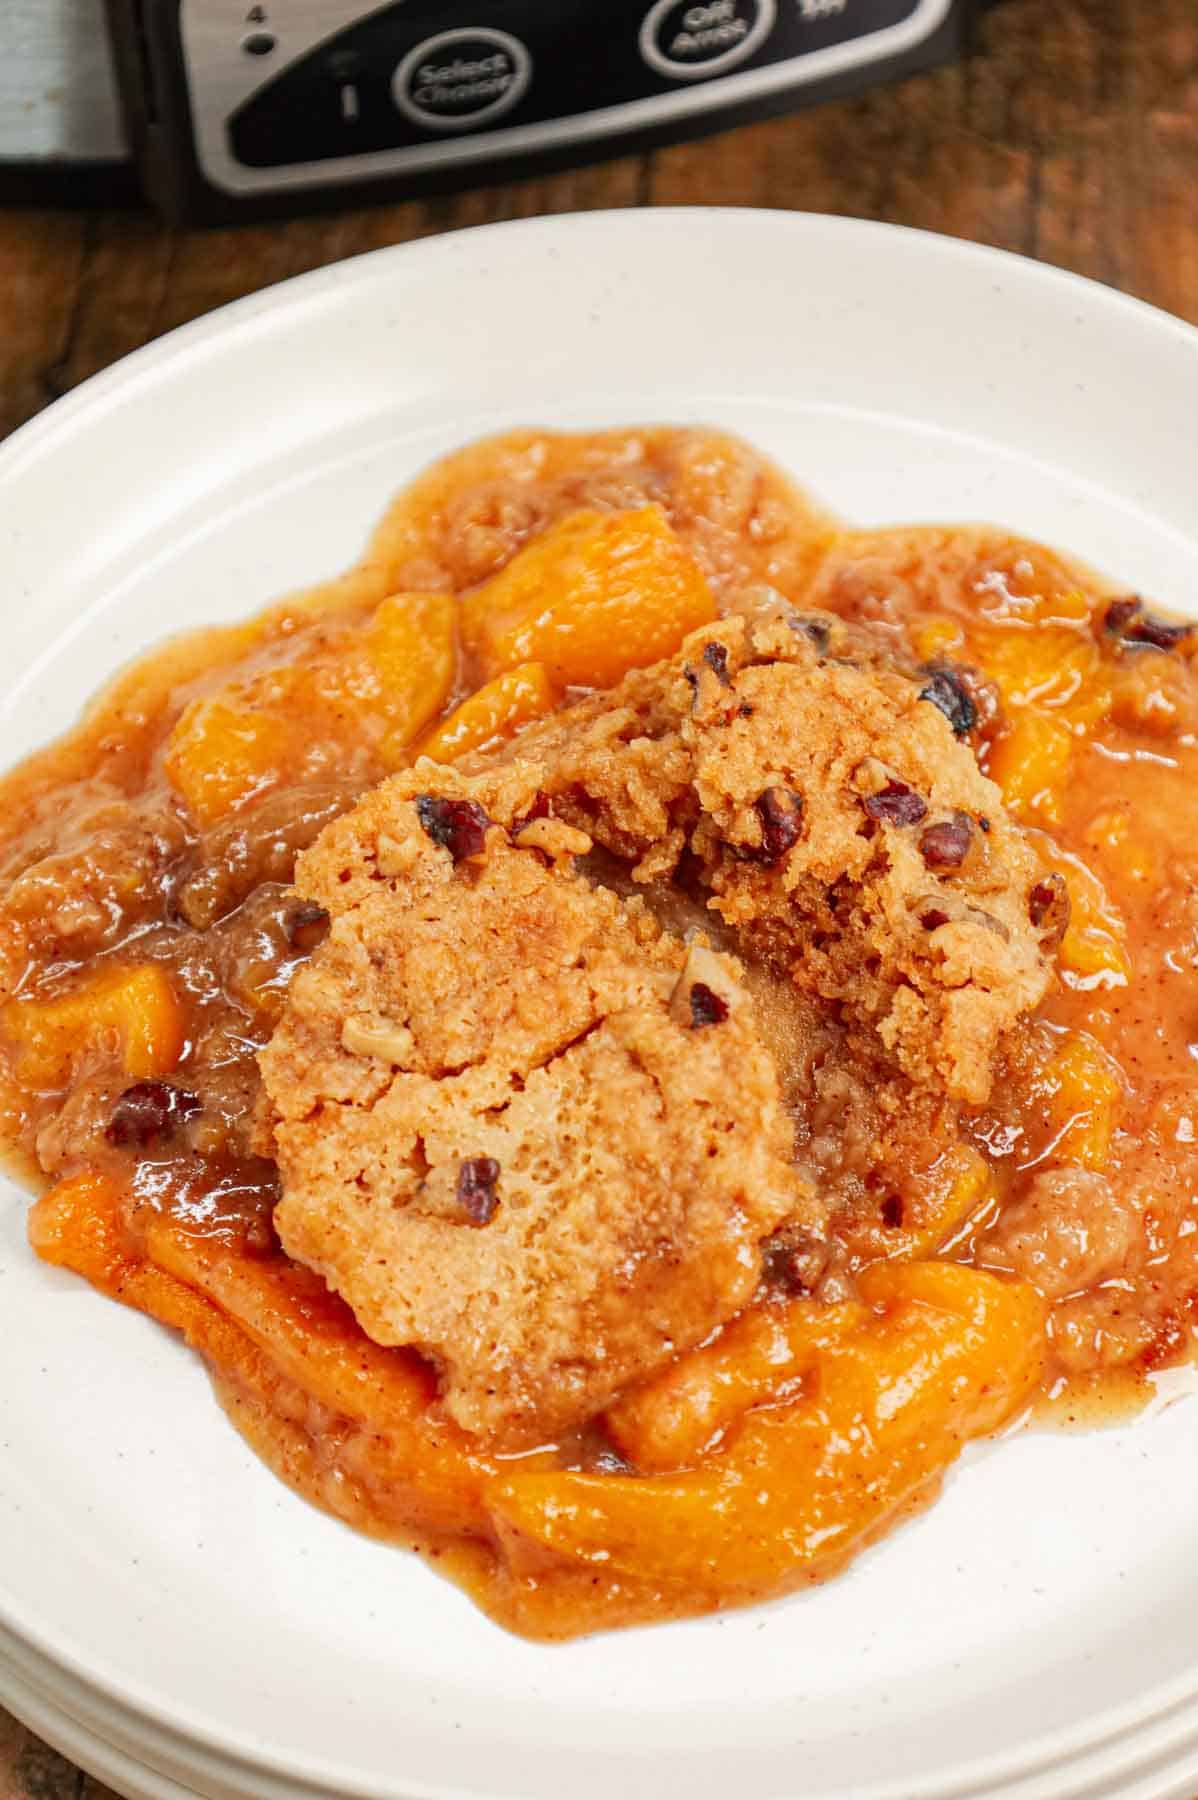 Crock Pot Peach Cobbler with Cake Mix is an easy slow cooker dessert recipe using canned peach slices, boxed butter pecan cake mix, brown sugar, cinnamon, butter and chopped pecans.